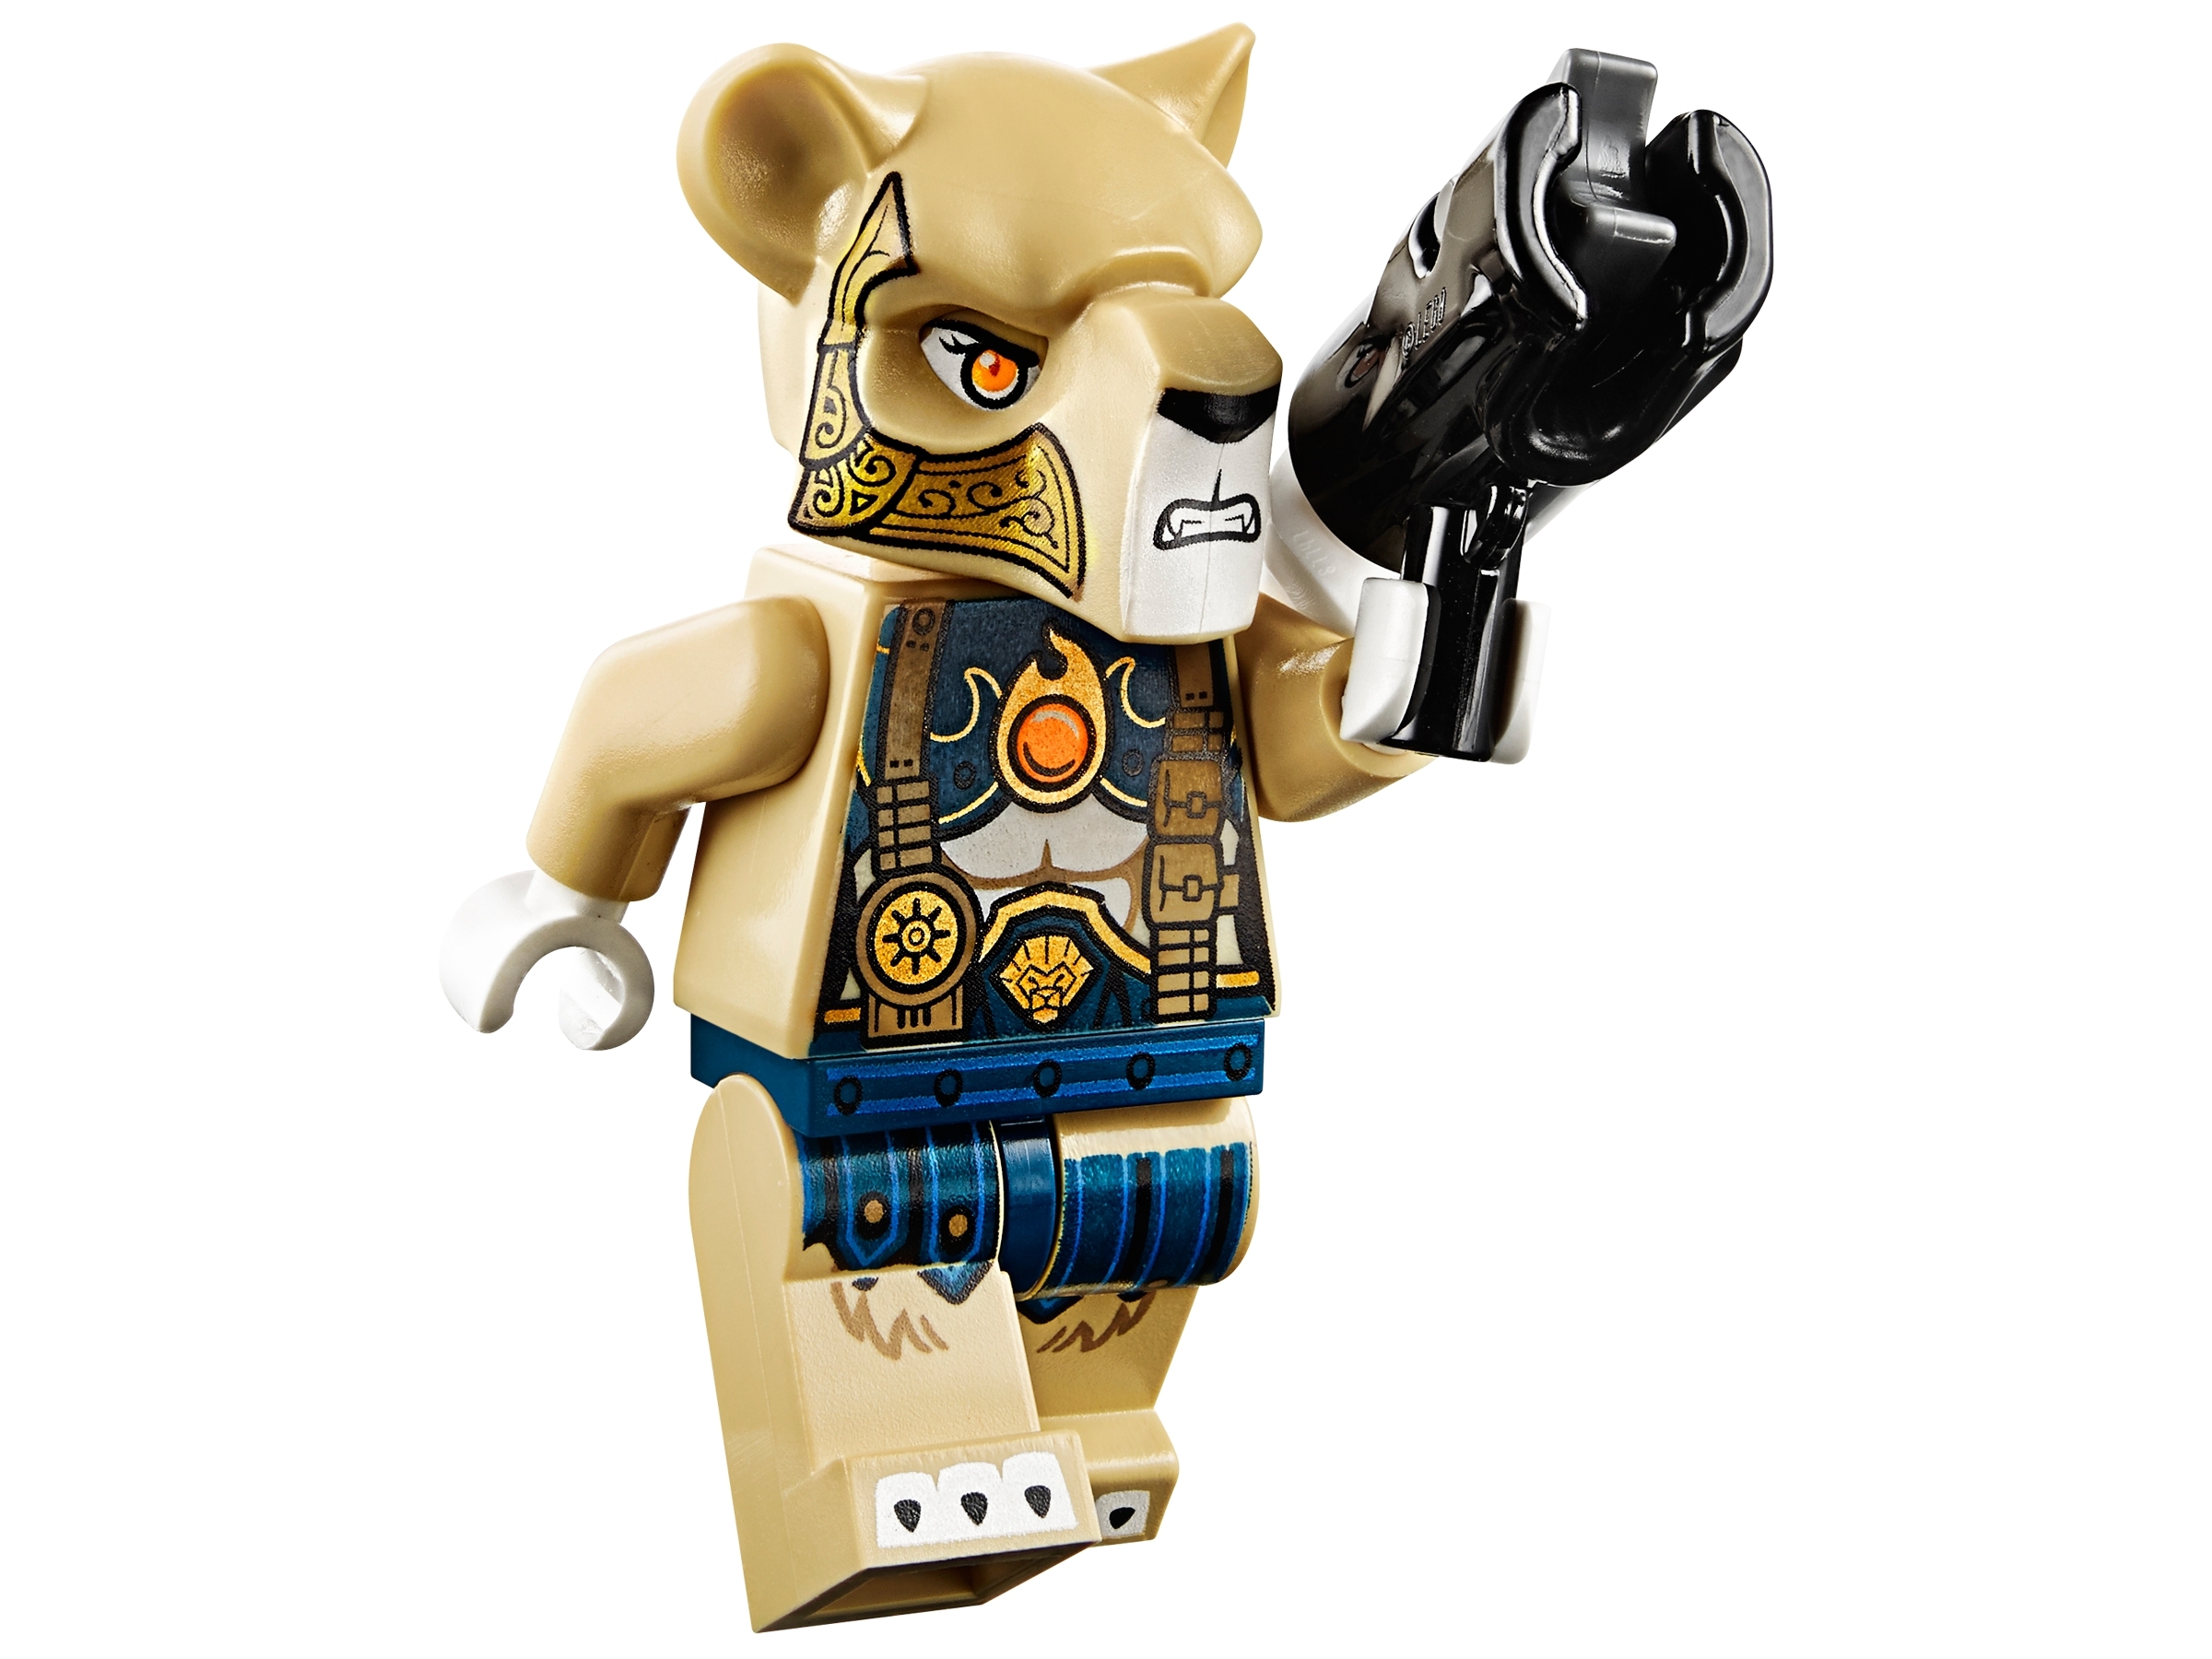 LEGO Chima 70229 Lion Tribe Pack